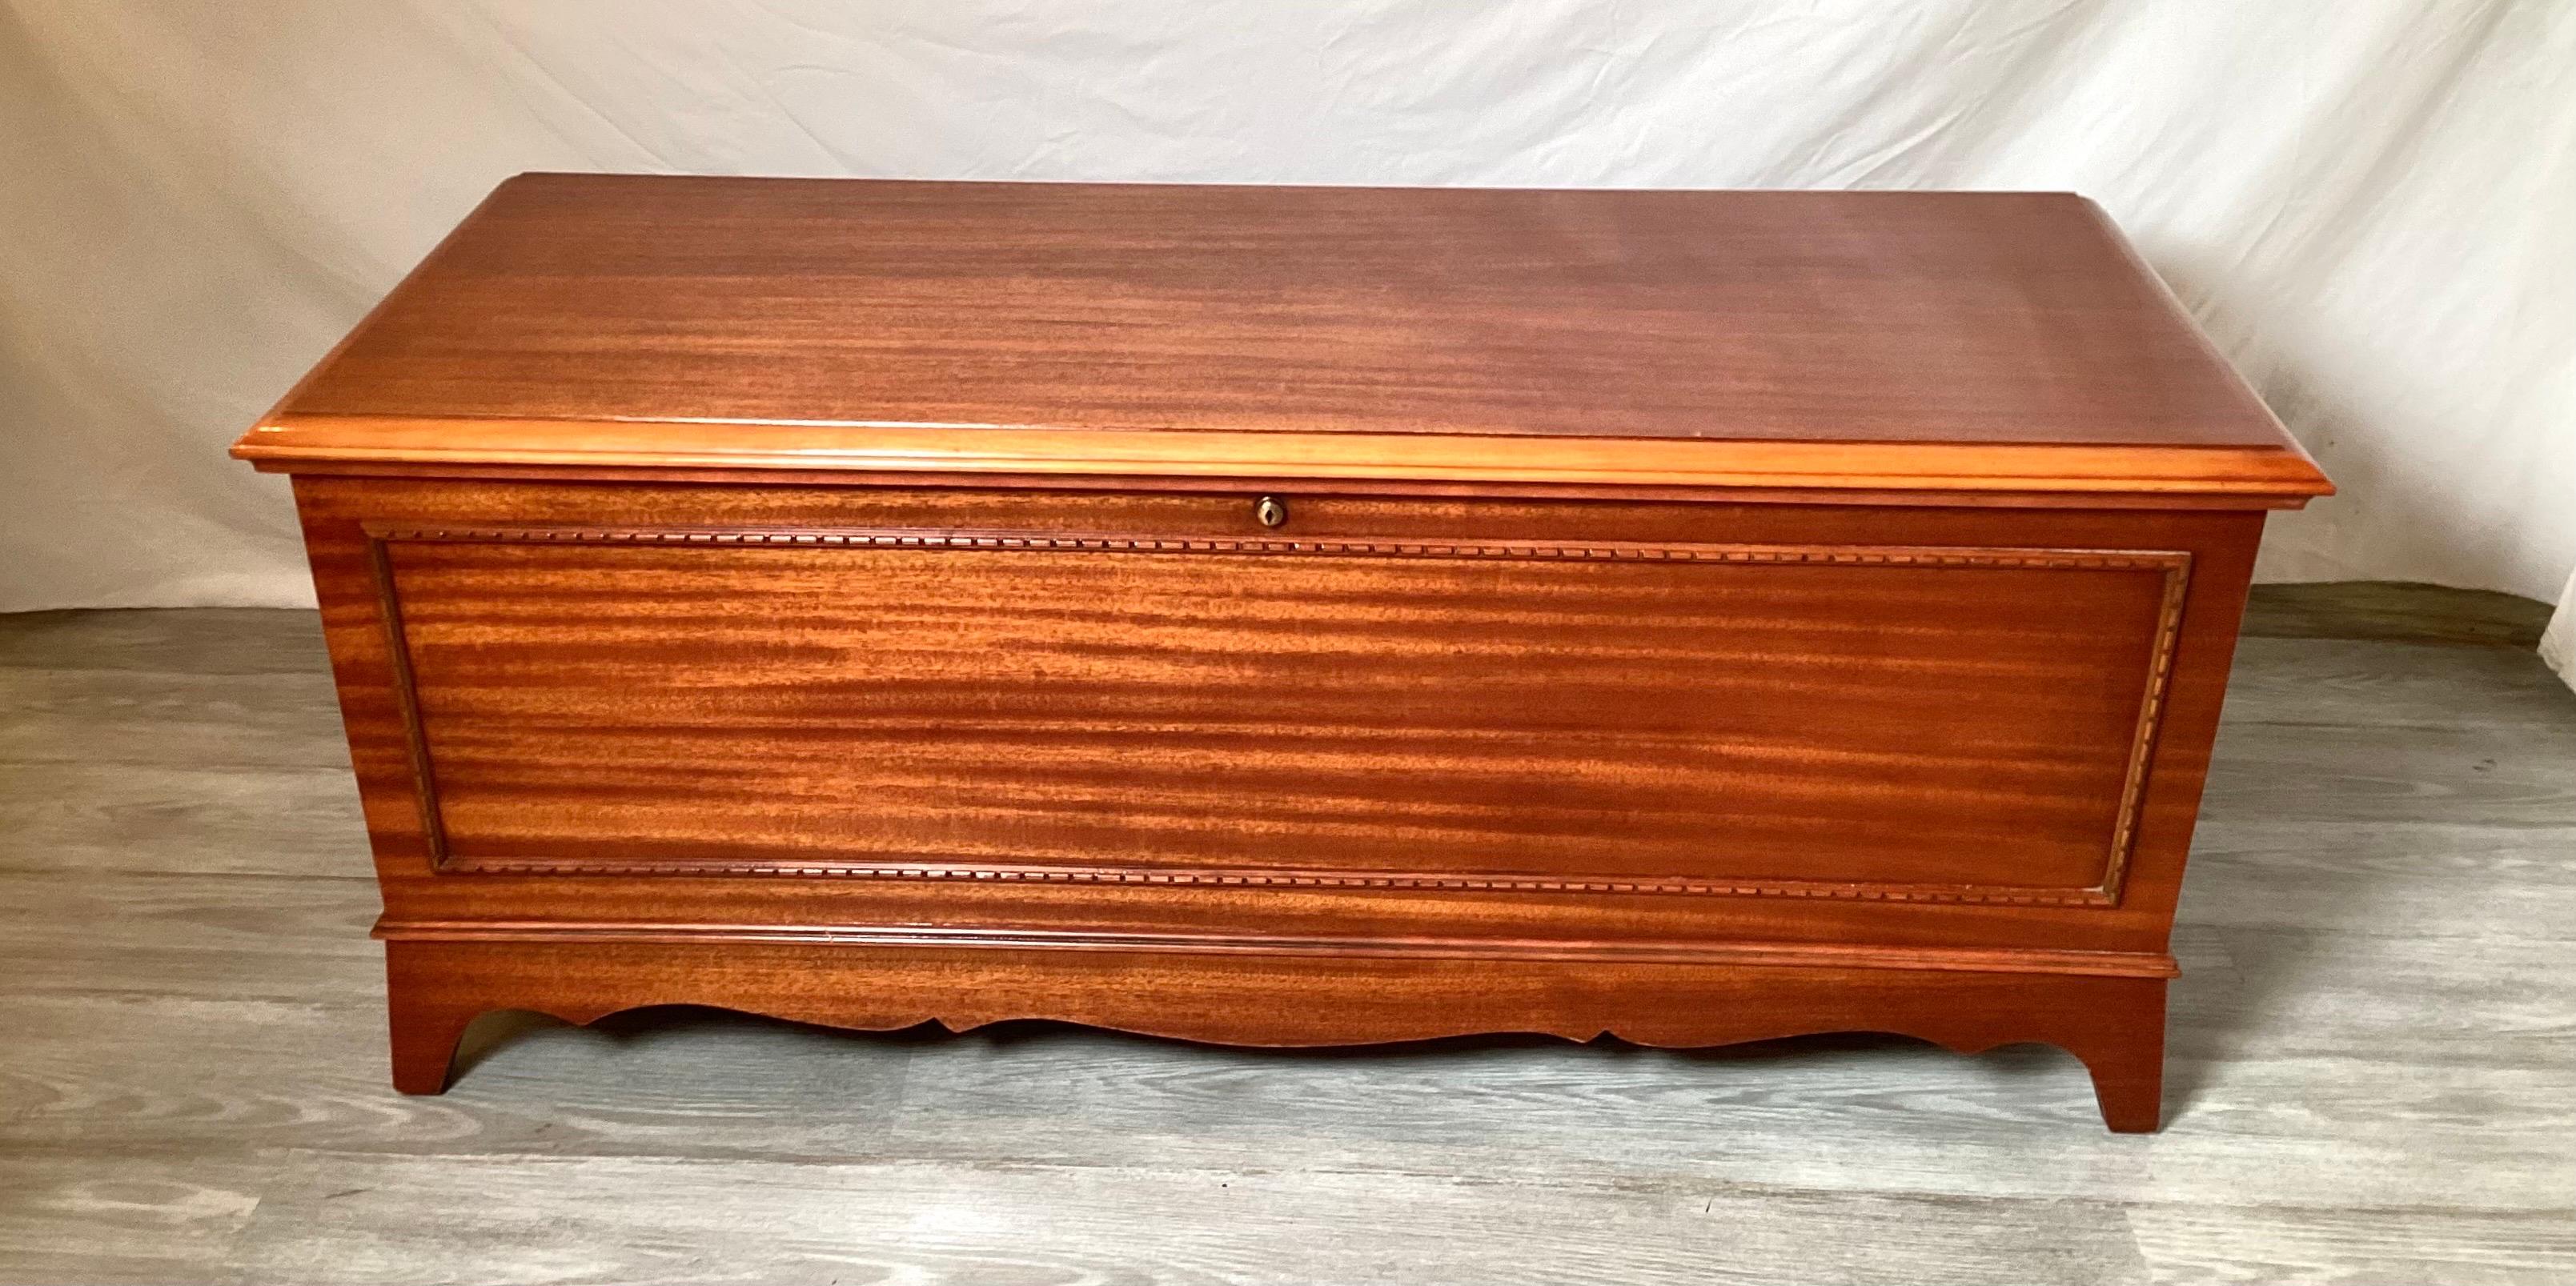 Chic and functional mid 20th century medium color mahogany chest with cedar wood lining. The chest, made by Lane is in near perfect condition with a lock, key and all original documentation. Made in 1951.